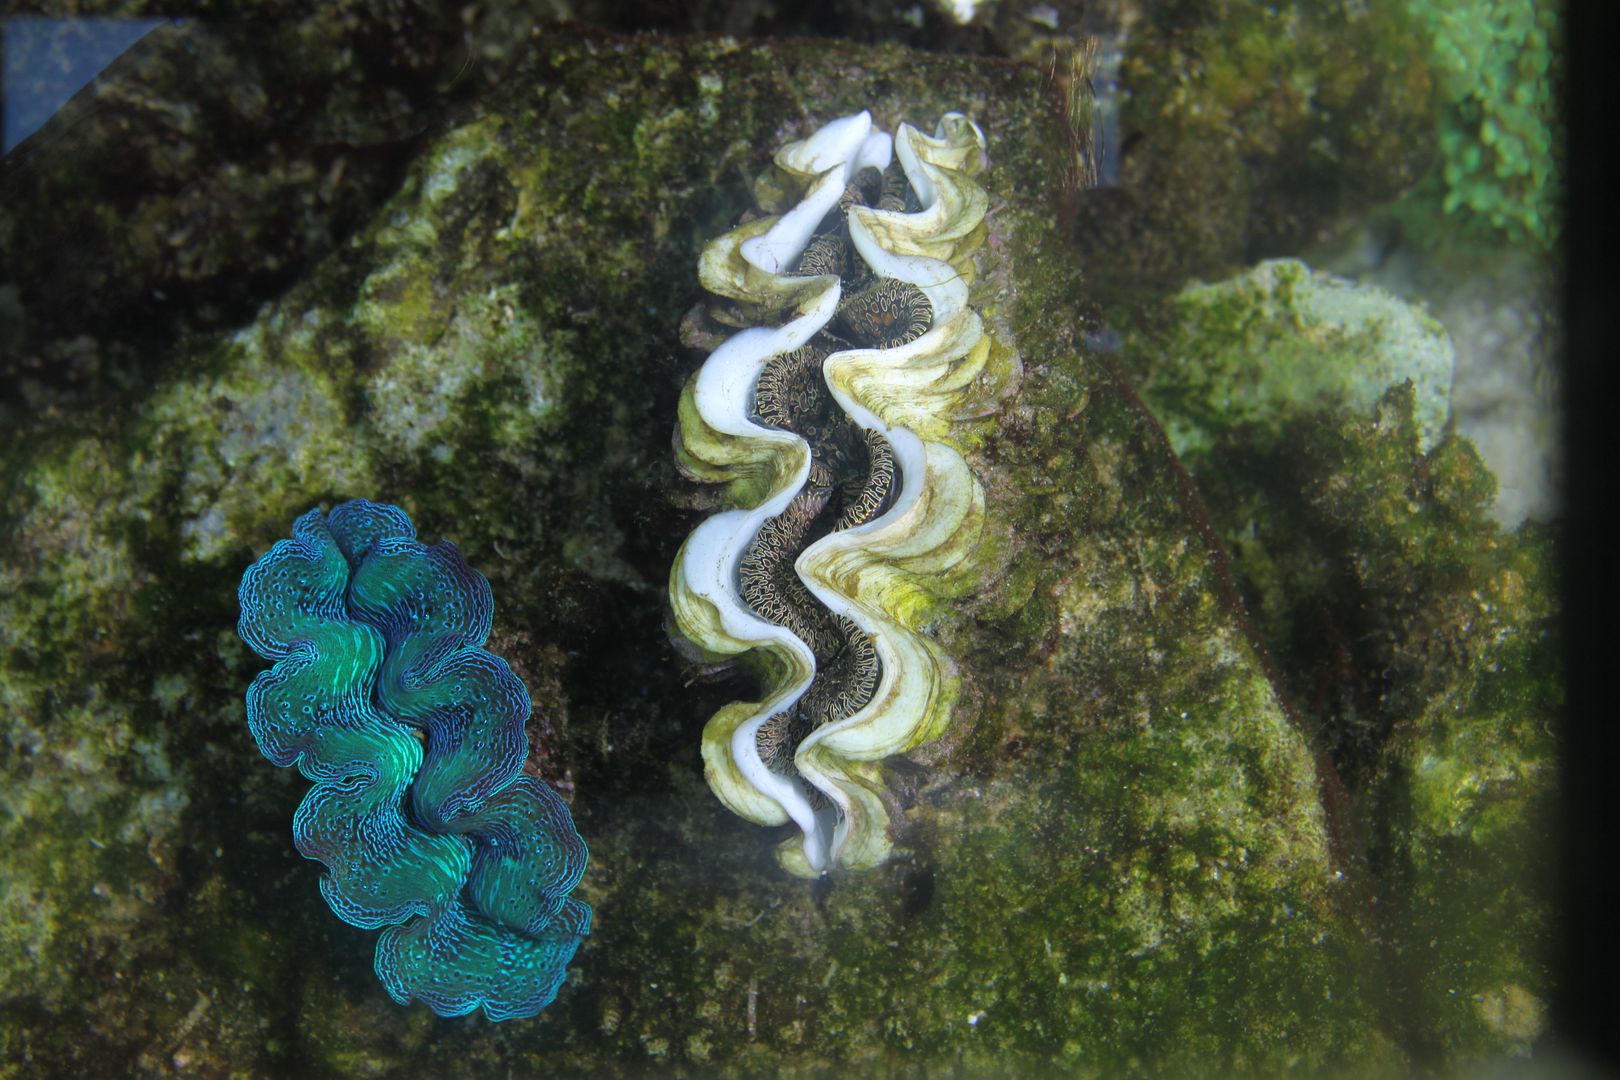 maxima clam dying